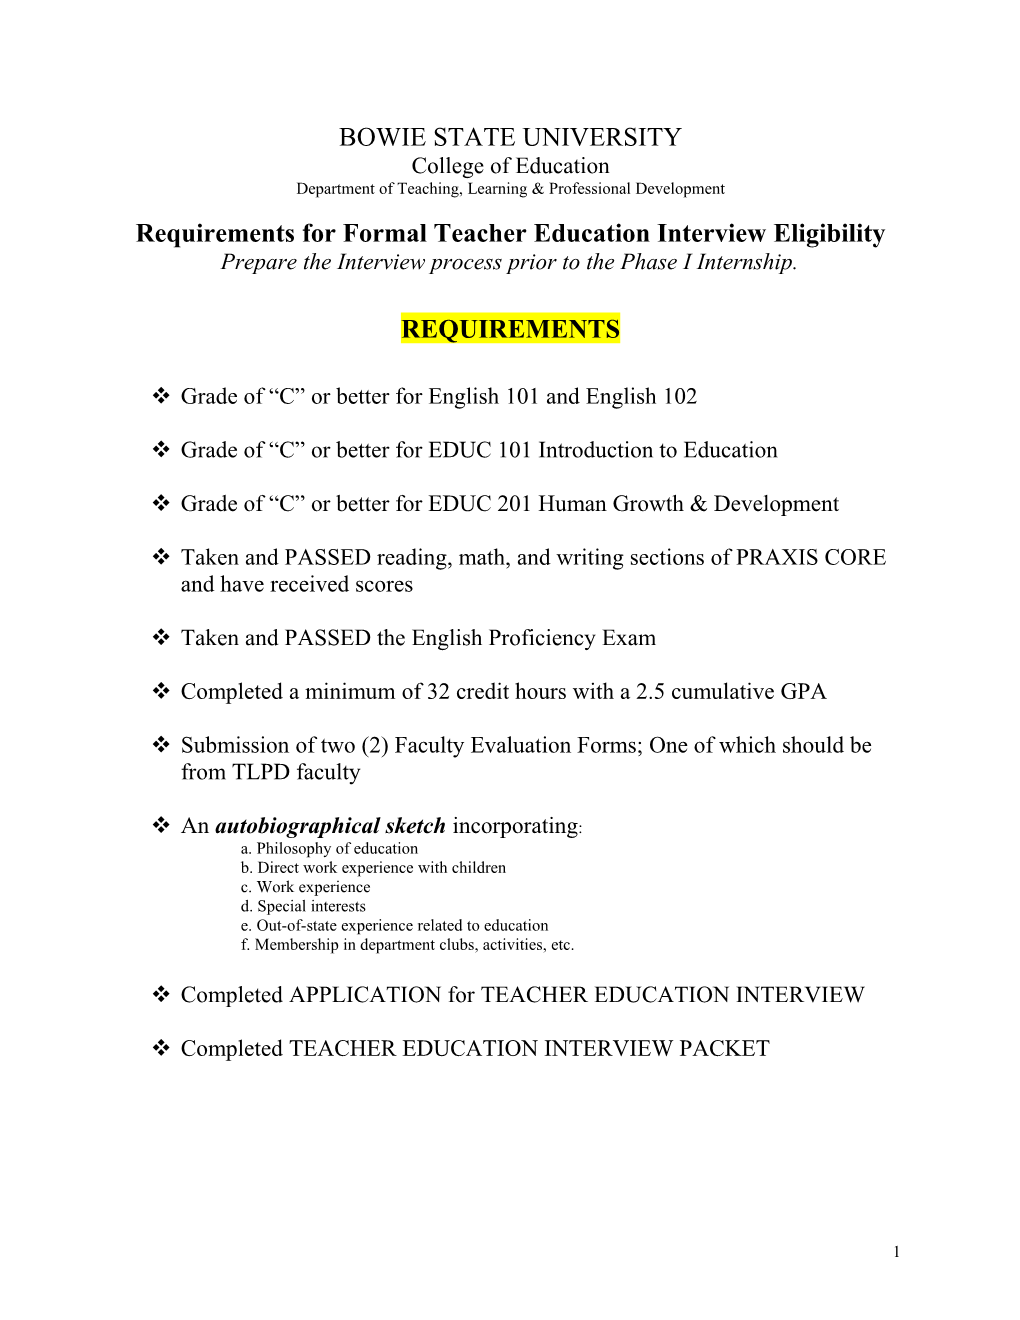 Requirements for Formal Teacher Education Interview Eligibility